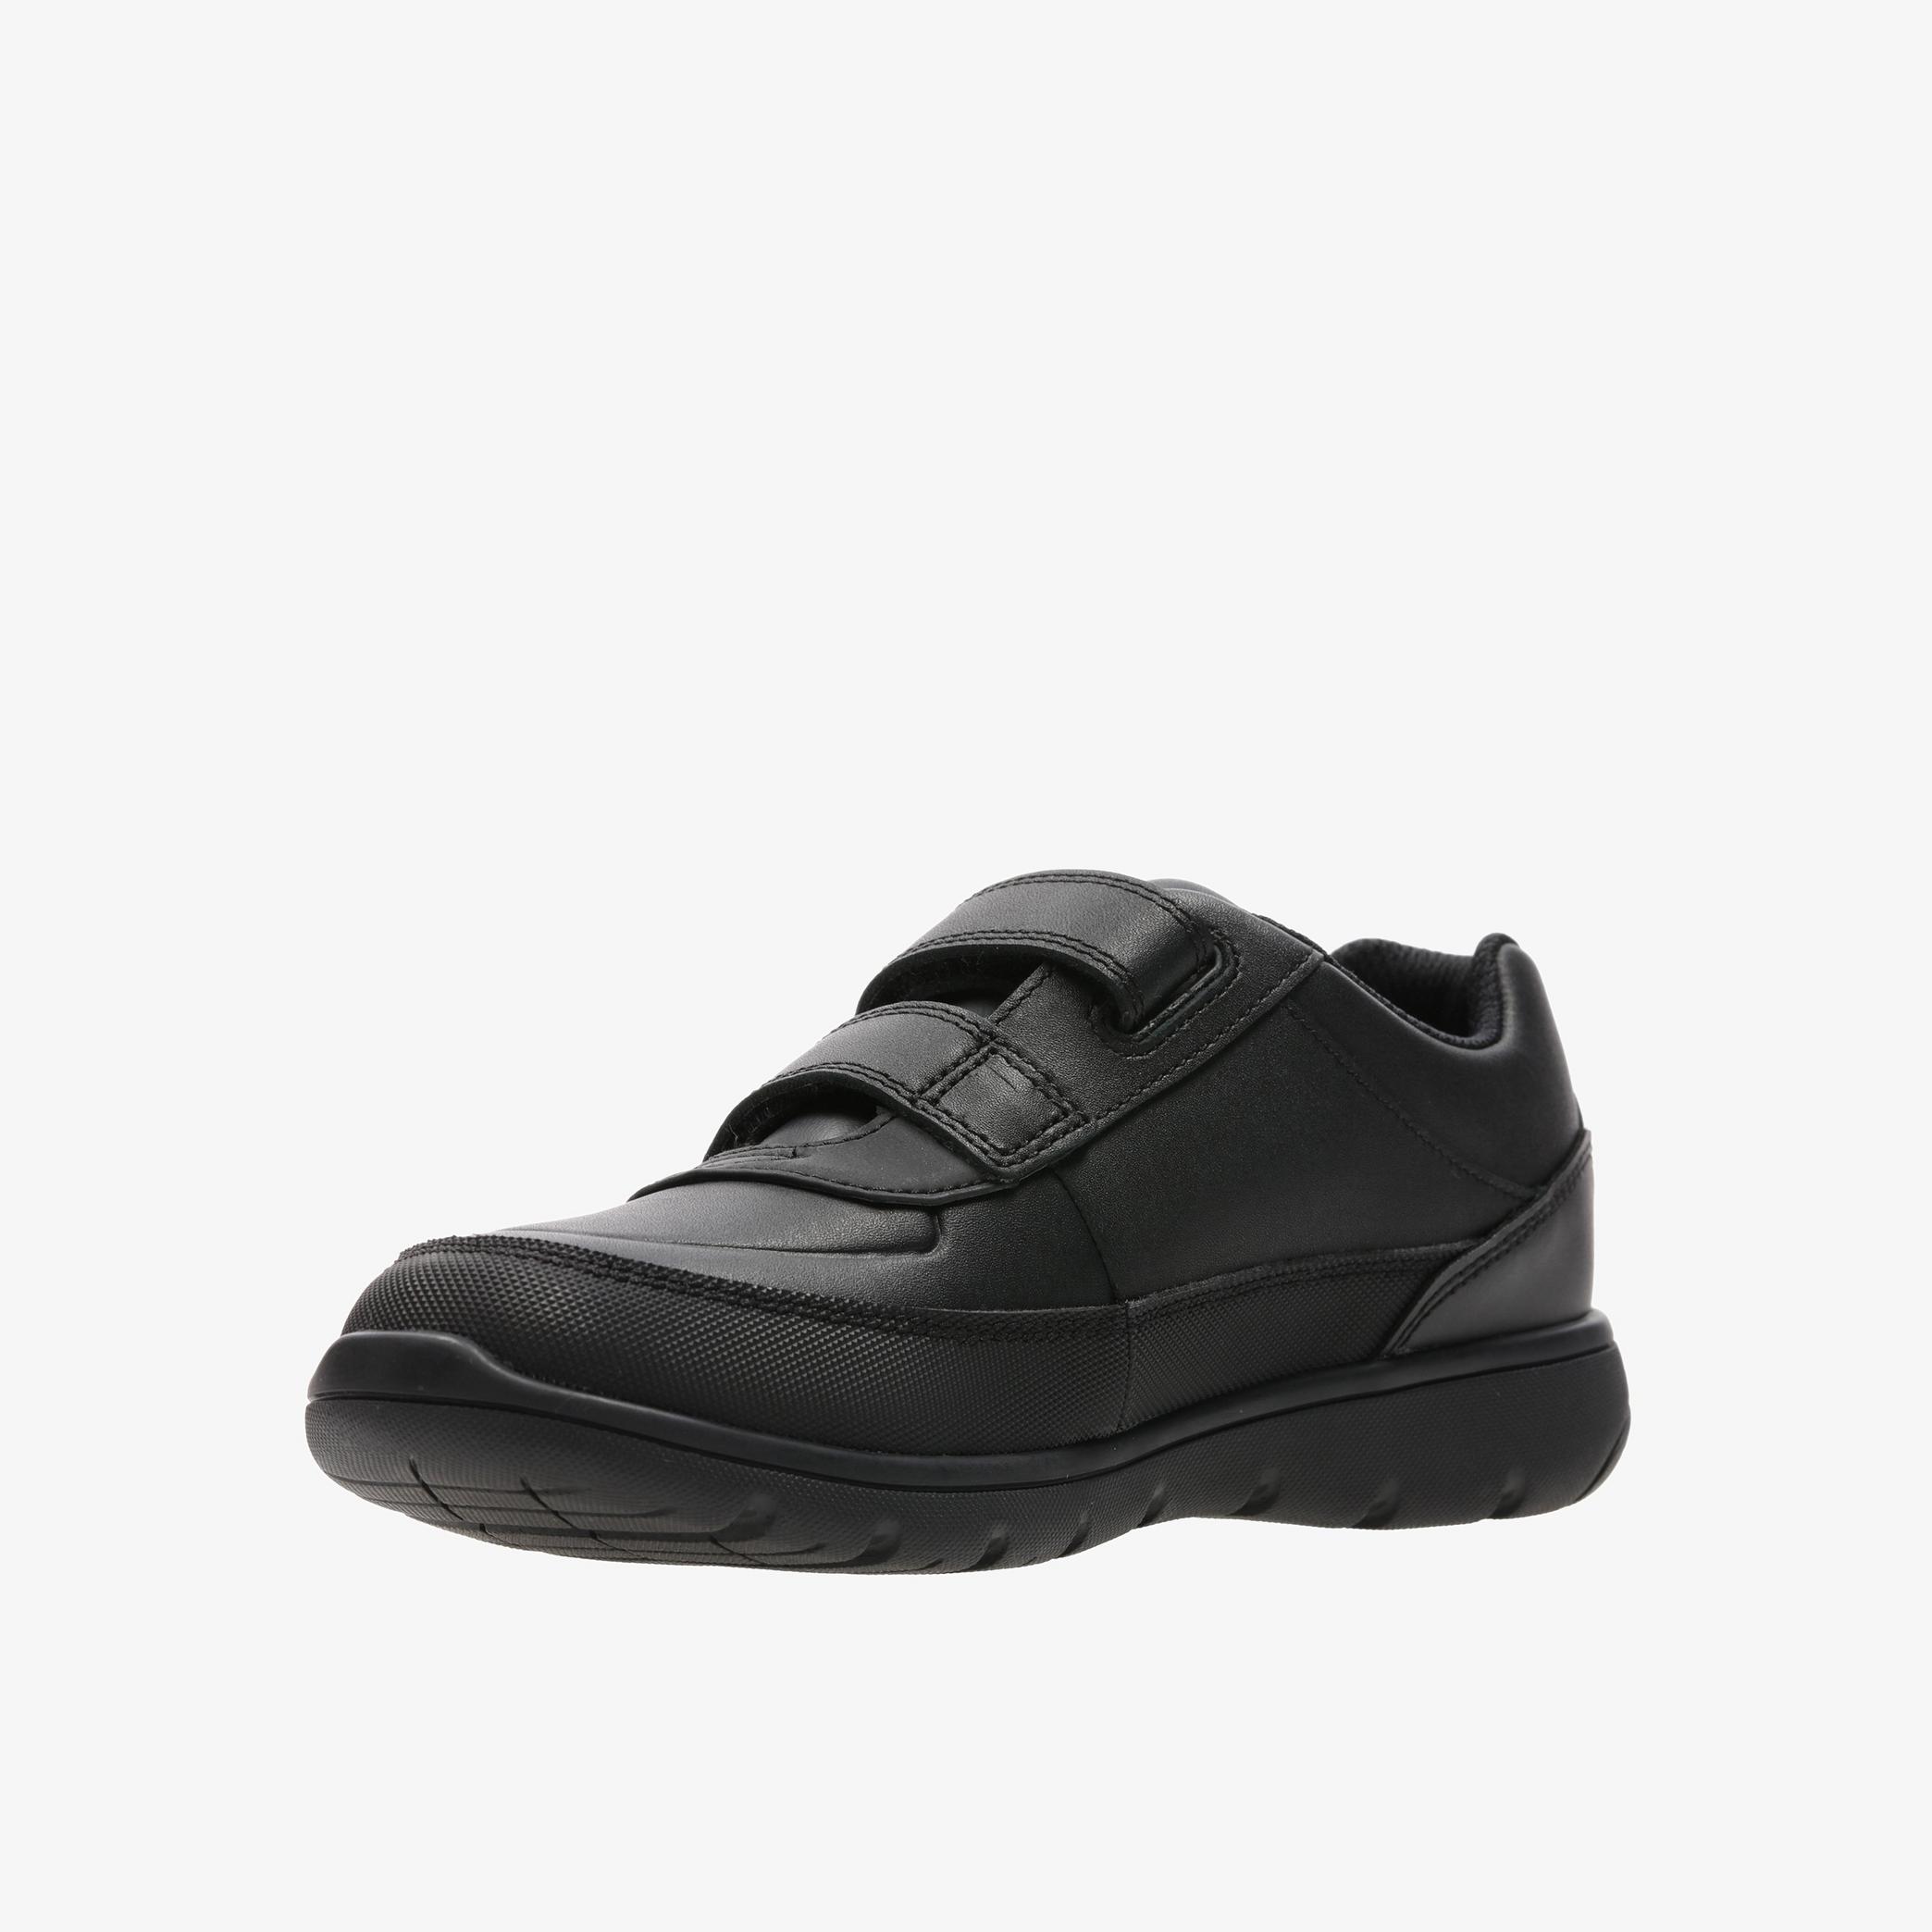 Venture Walk Kid Black Leather Shoes, view 4 of 6